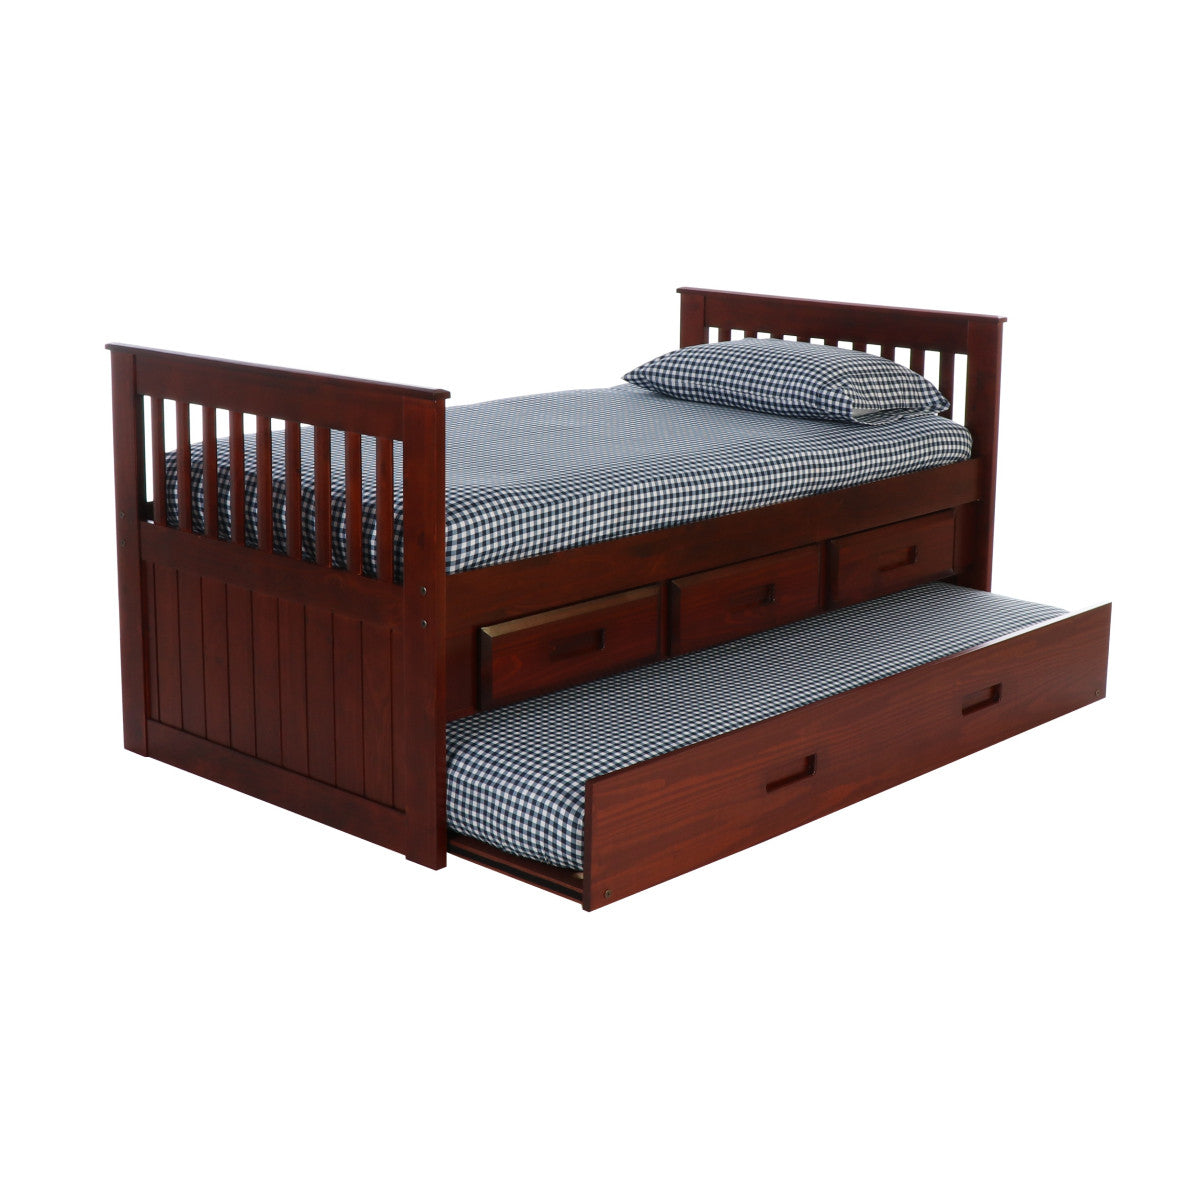 TWIN MISSION RAKE BED WITH 3 DRAWER STORAGE AND TWIN TRUNDLE BED IN MERLOT FINISH